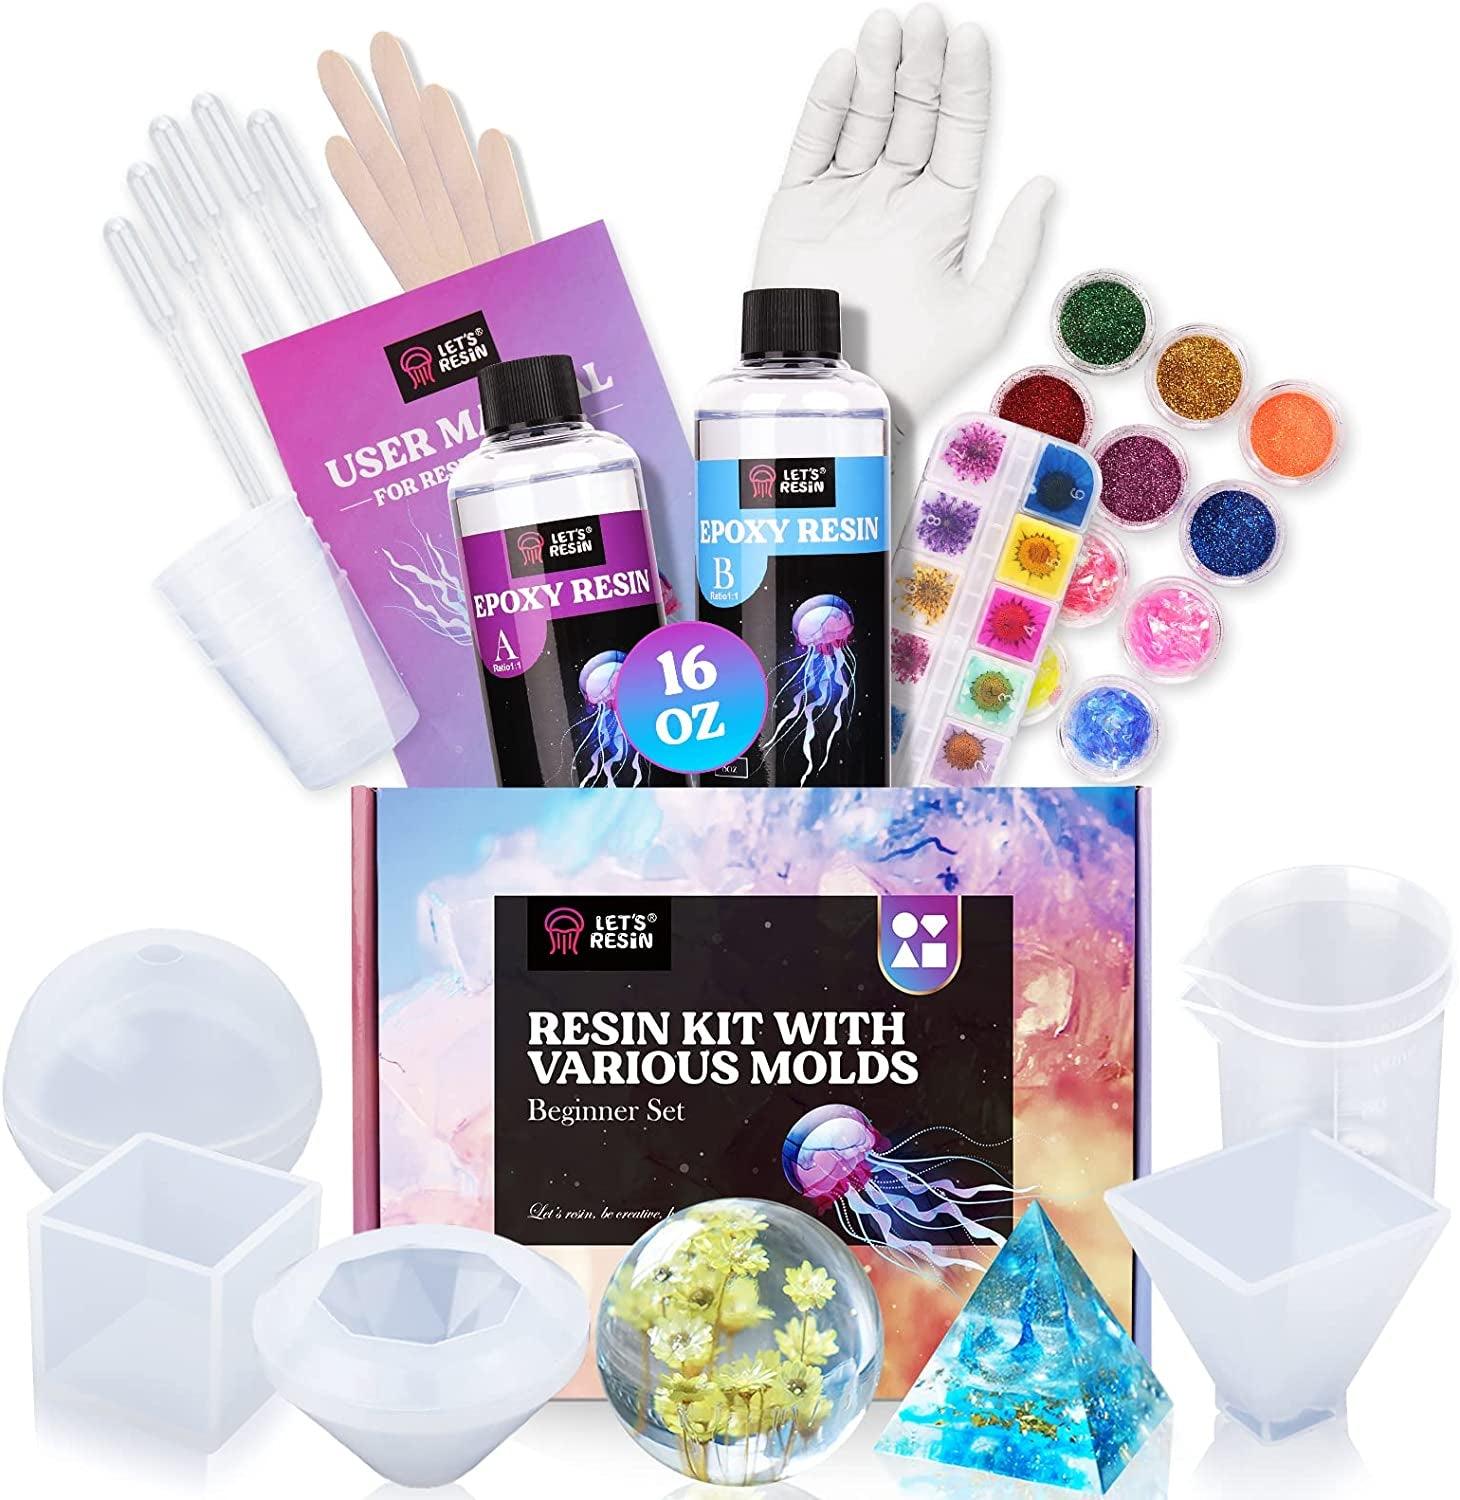 IGaiety Resin Jewelry Making Kit 240 Pcs Silicone Epoxy Resin Mold Keychain Starter Kit Bundle with Resin Molds and Pigments Tools for Resin